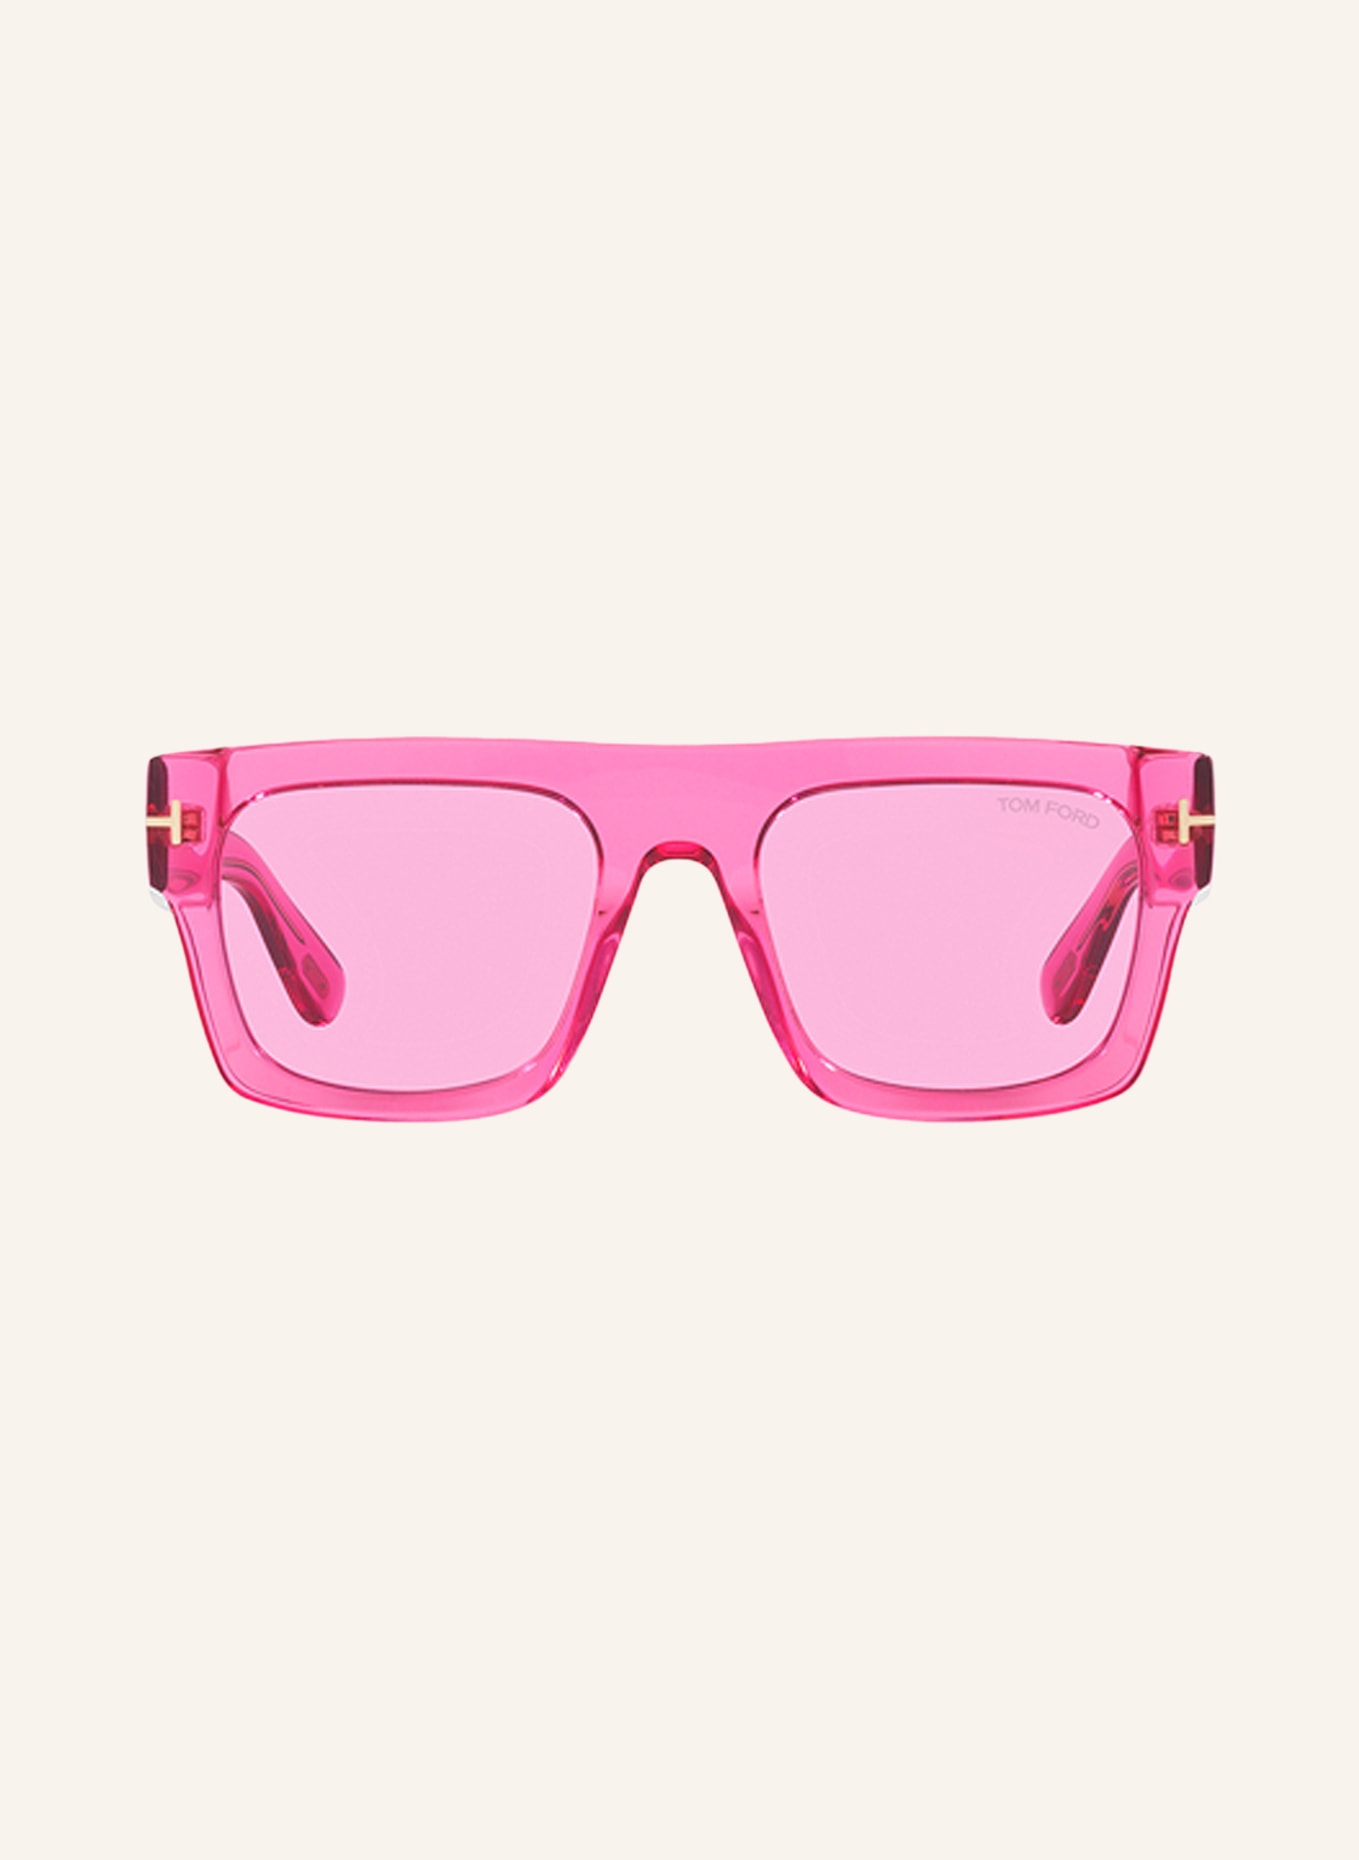 TOM FORD Sonnenbrille FT0711 FAUSTO, Farbe: 3500R1 - PINK/ PINK (Bild 2)